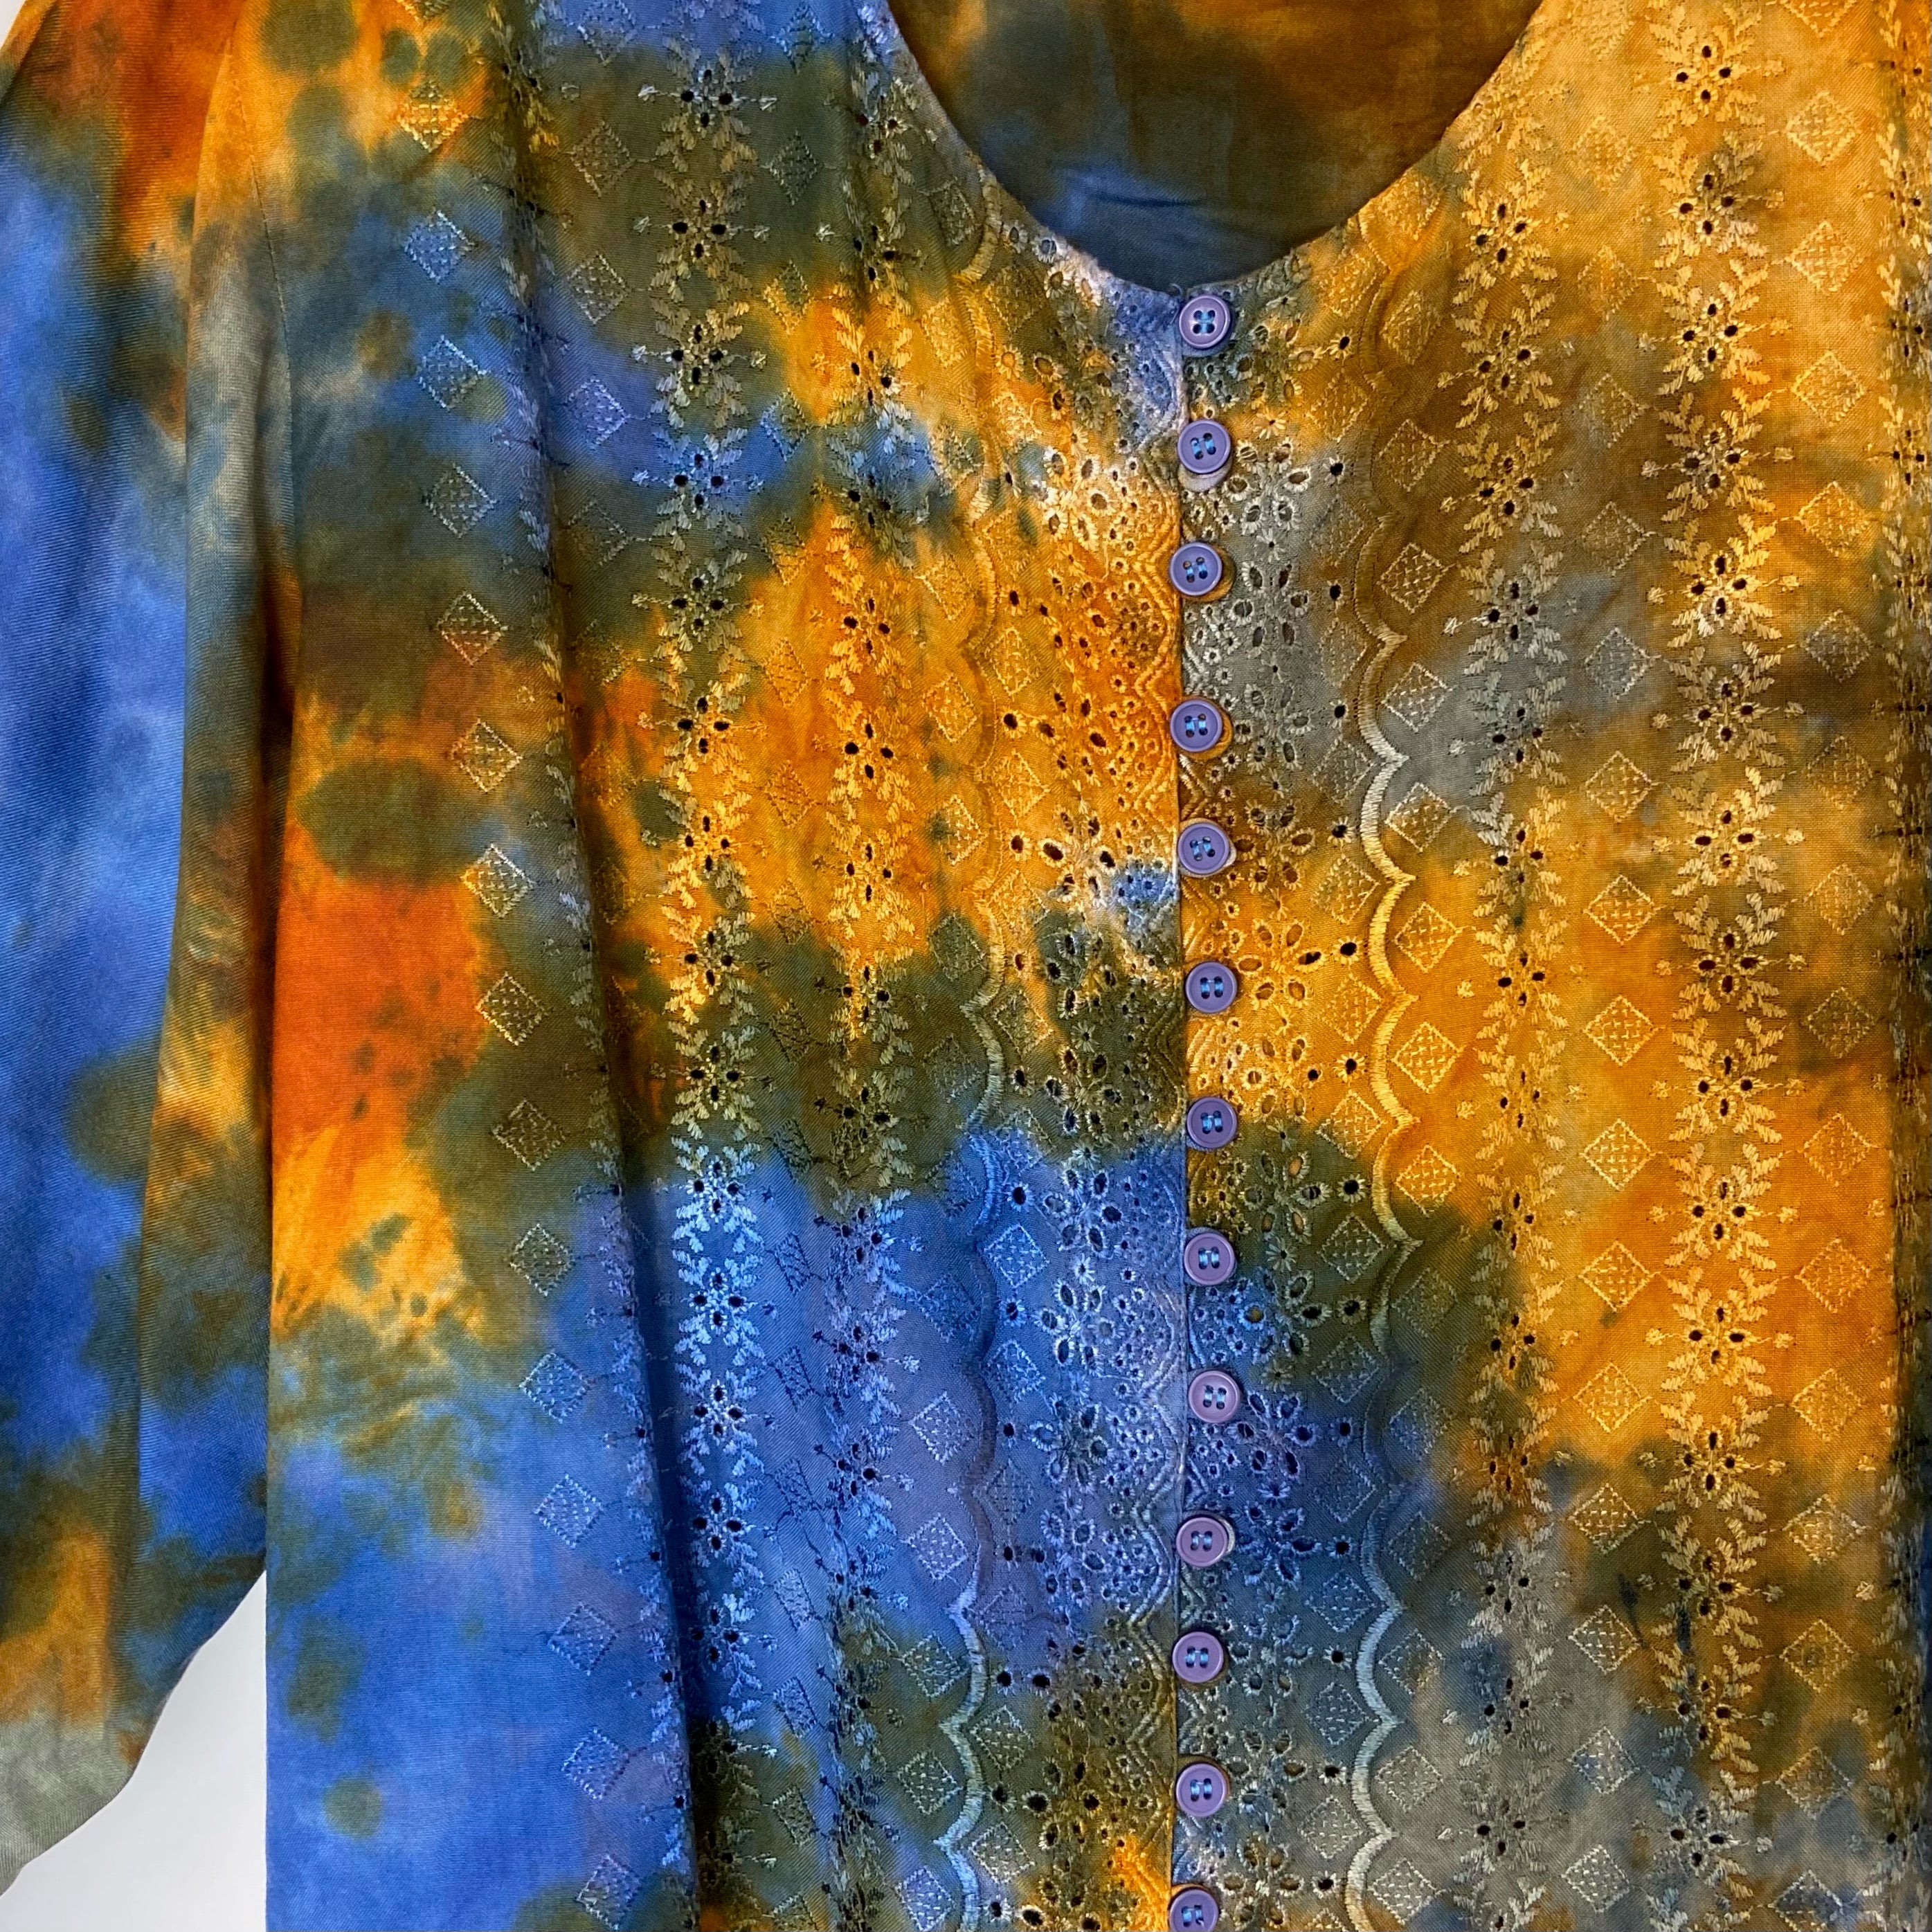 Tie Dye Embroidered Blouse - Blue and Orange